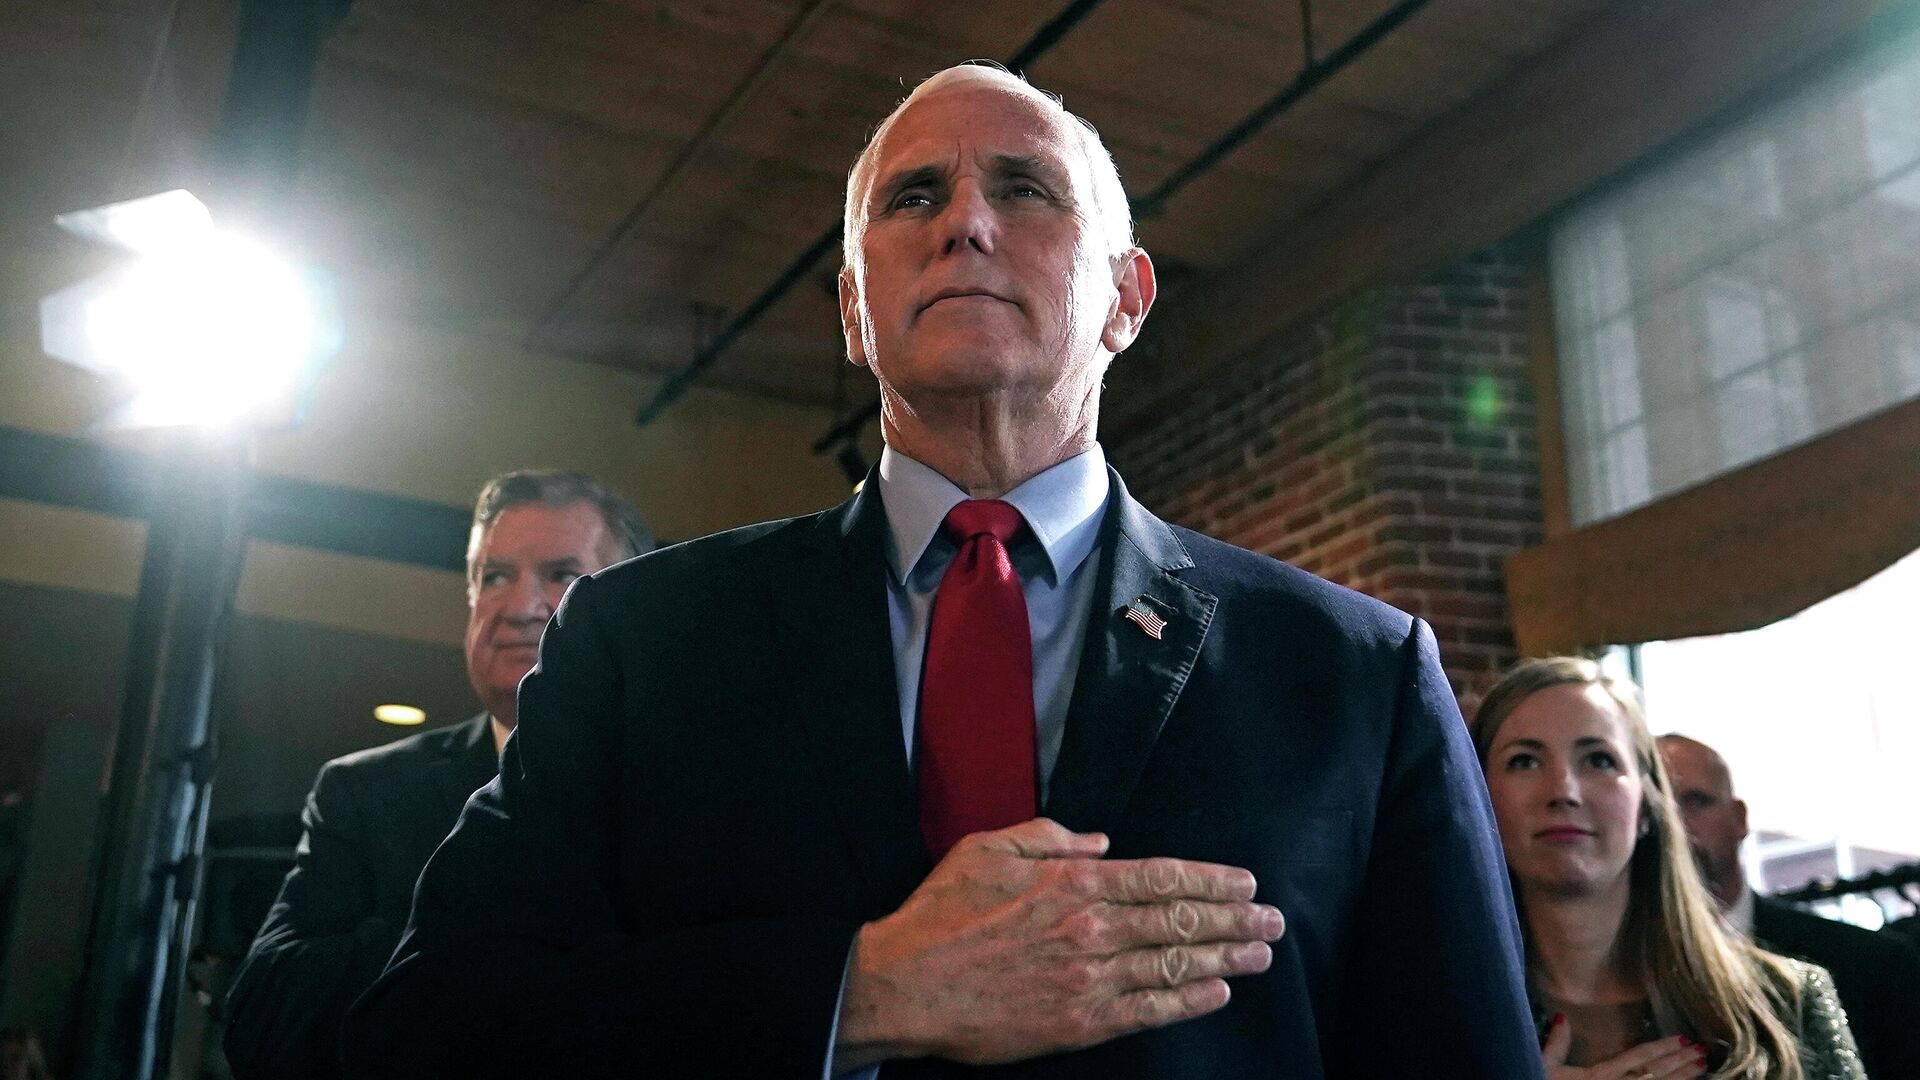 Former Vice President Mike Pence stands for the Pledge of Allegiance during a gathering, Wednesday, Dec. 8, 2021, in Manchester, N.H.  - Sputnik International, 1920, 08.01.2022